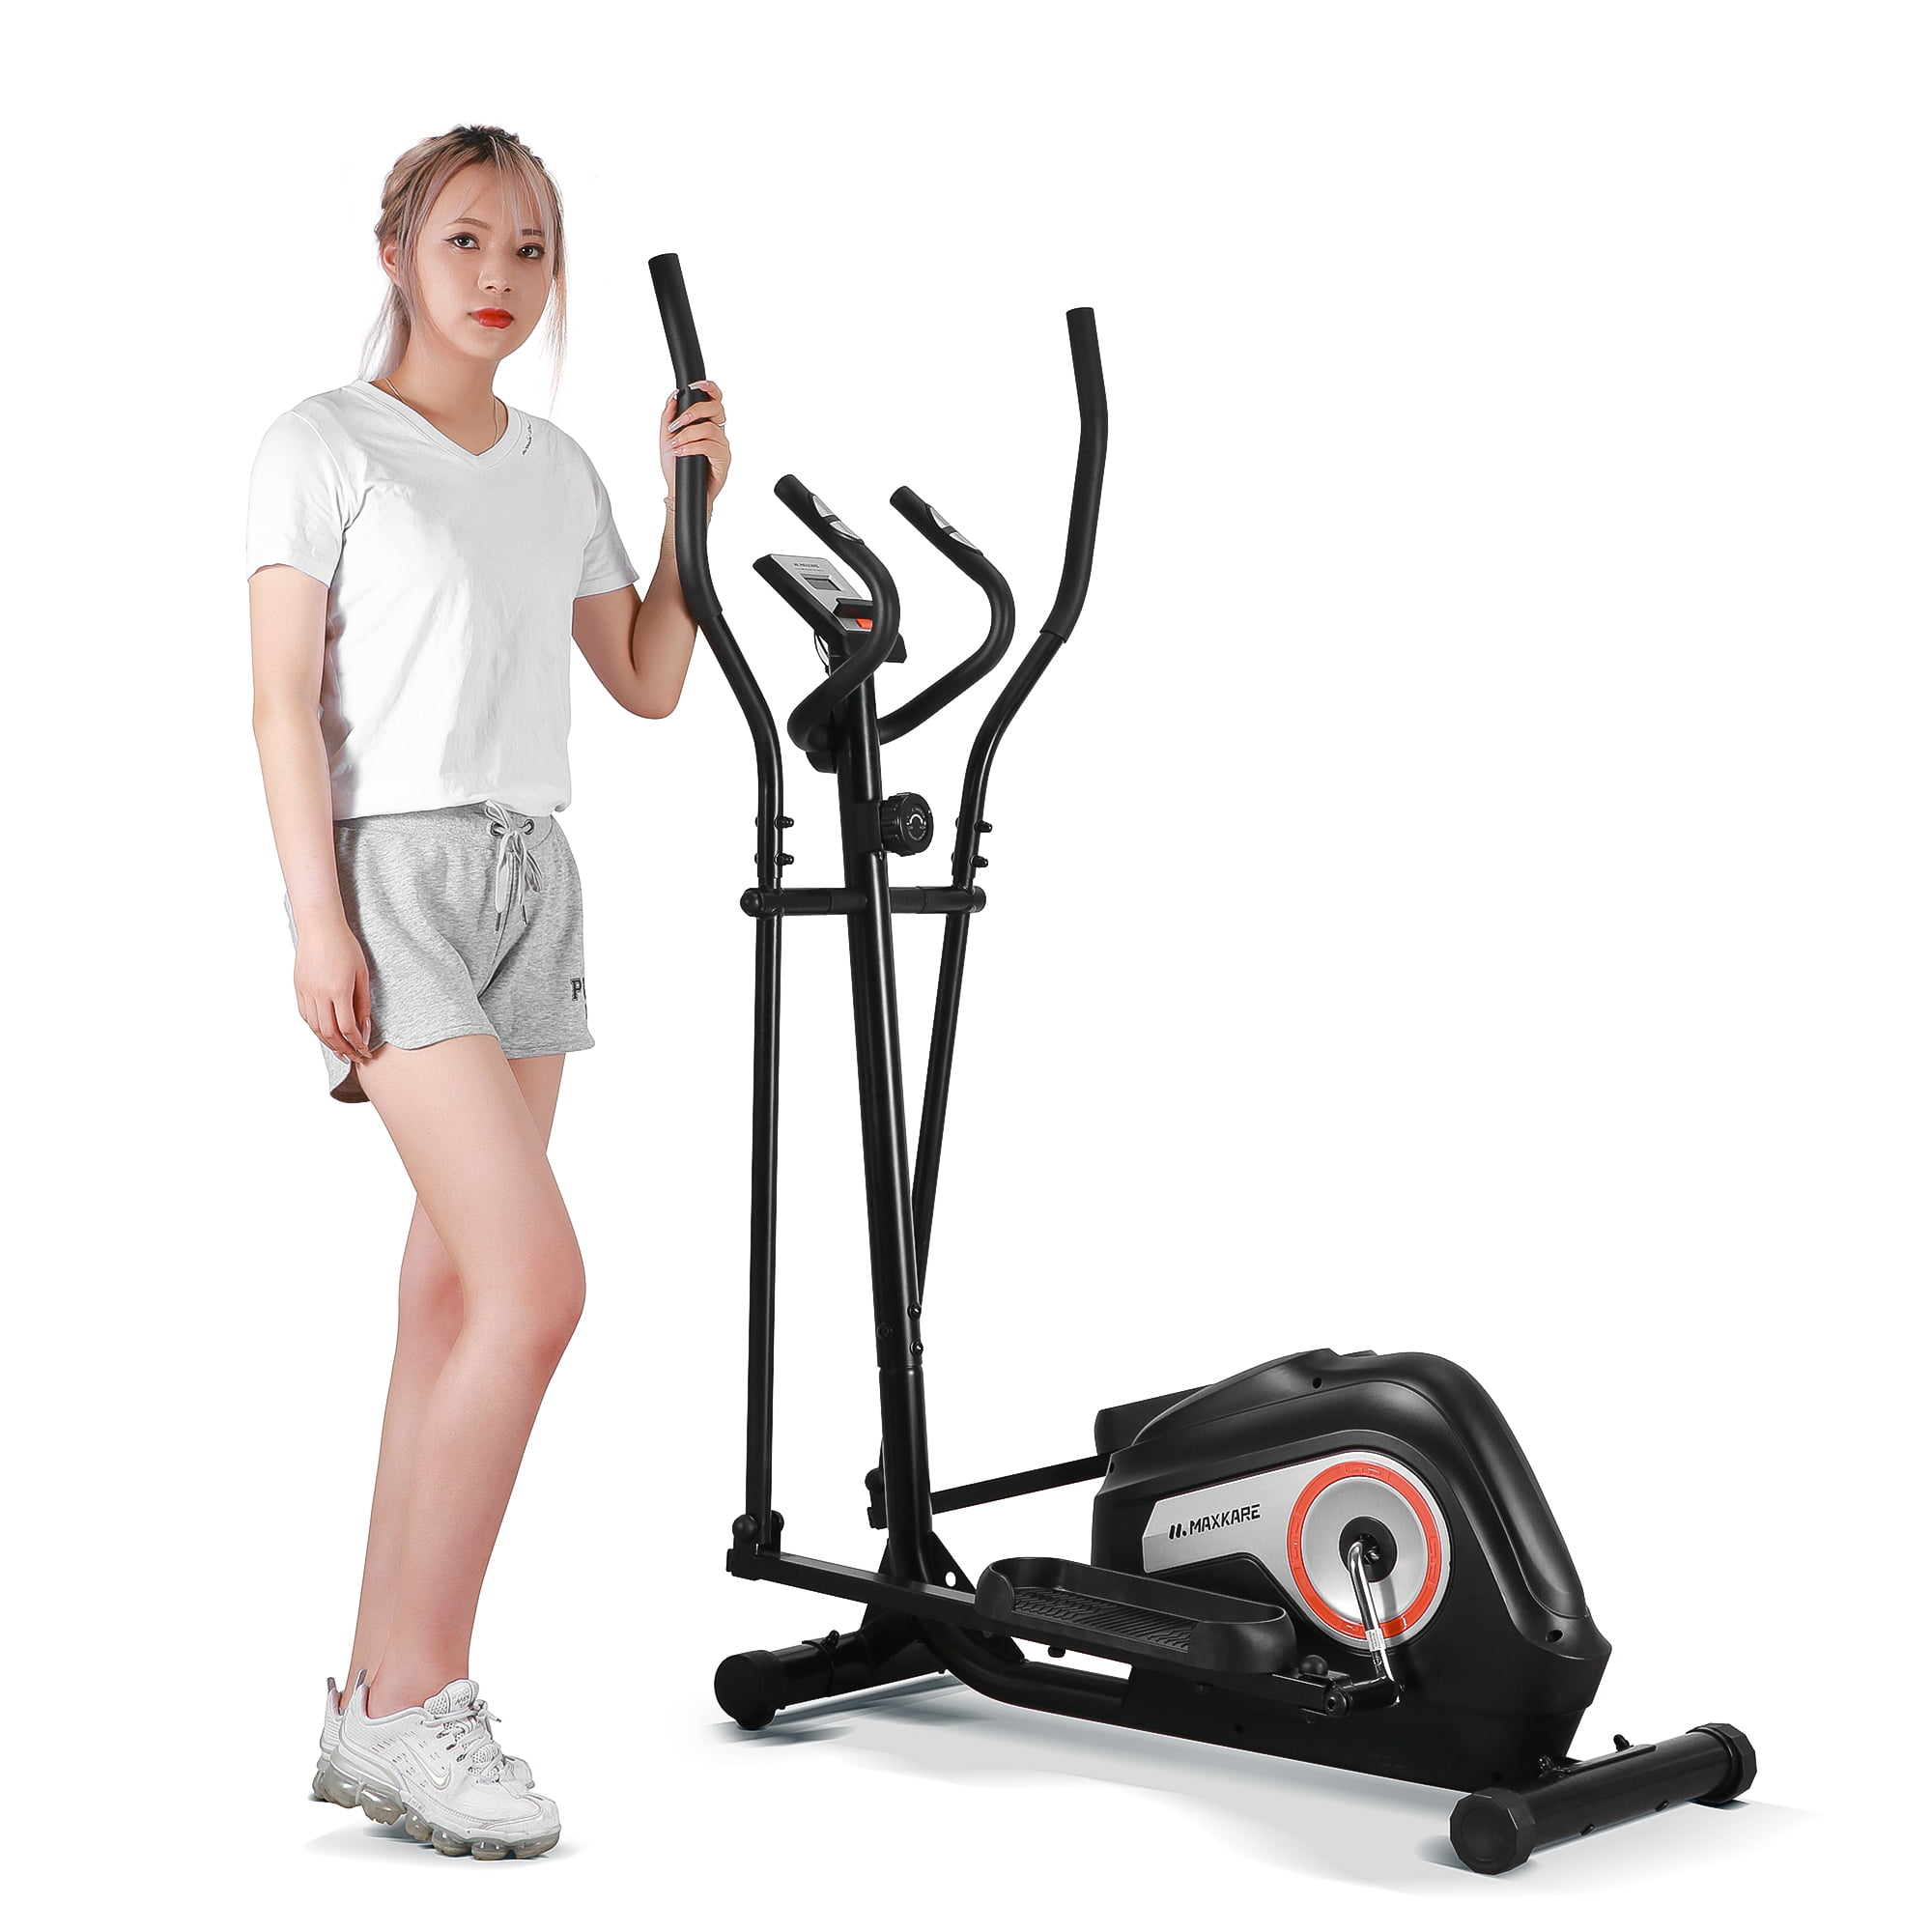 Details about   ANCHEER Magnetic Elliptical Exercise Fitness Training Machine Home Gym Cardio! 